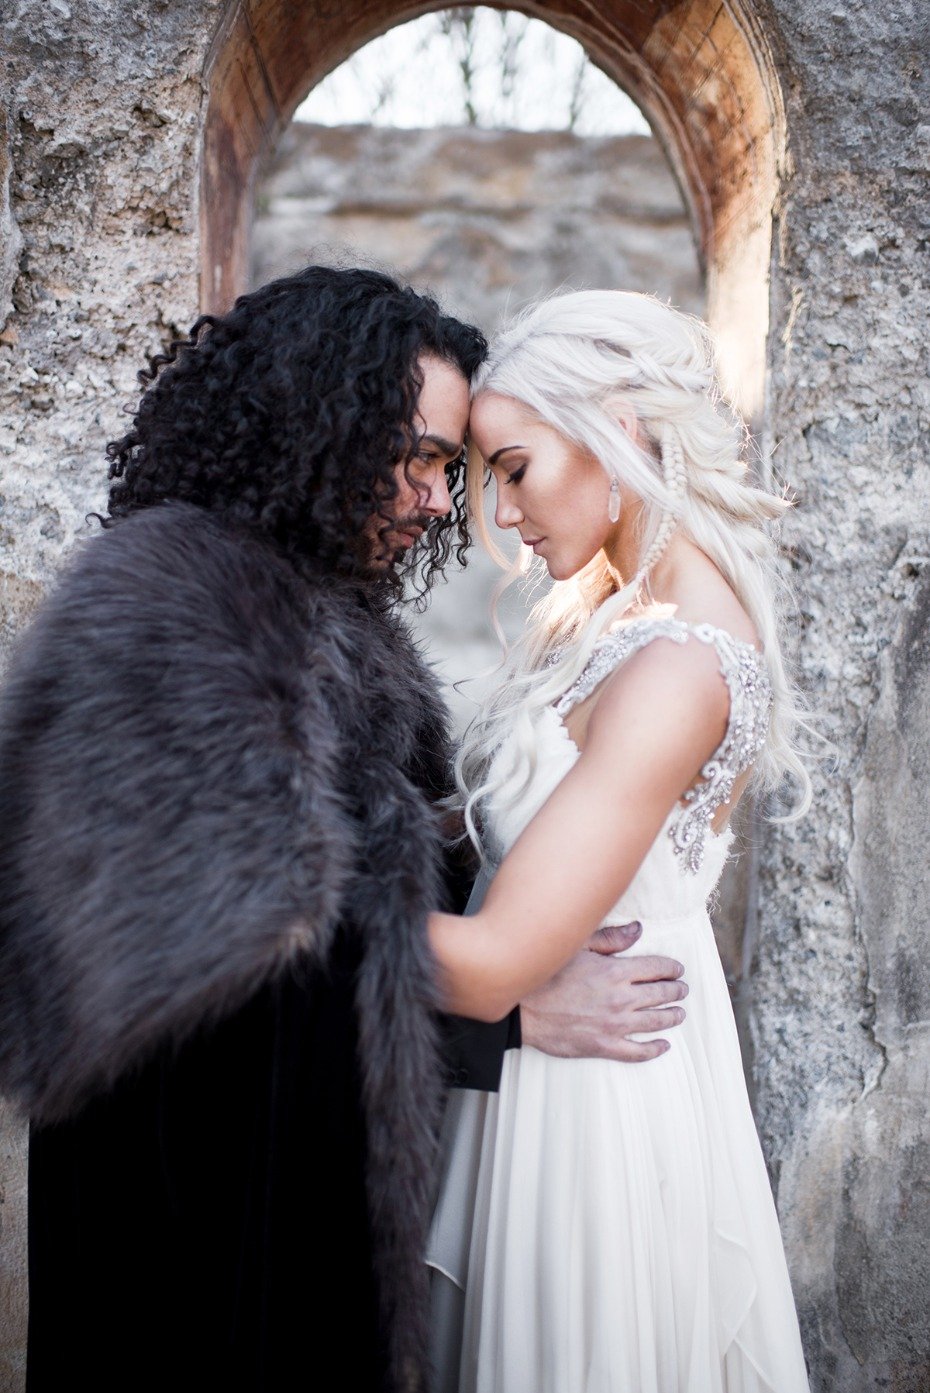 Fire And Ice Game Of Thrones Wedding Ideas